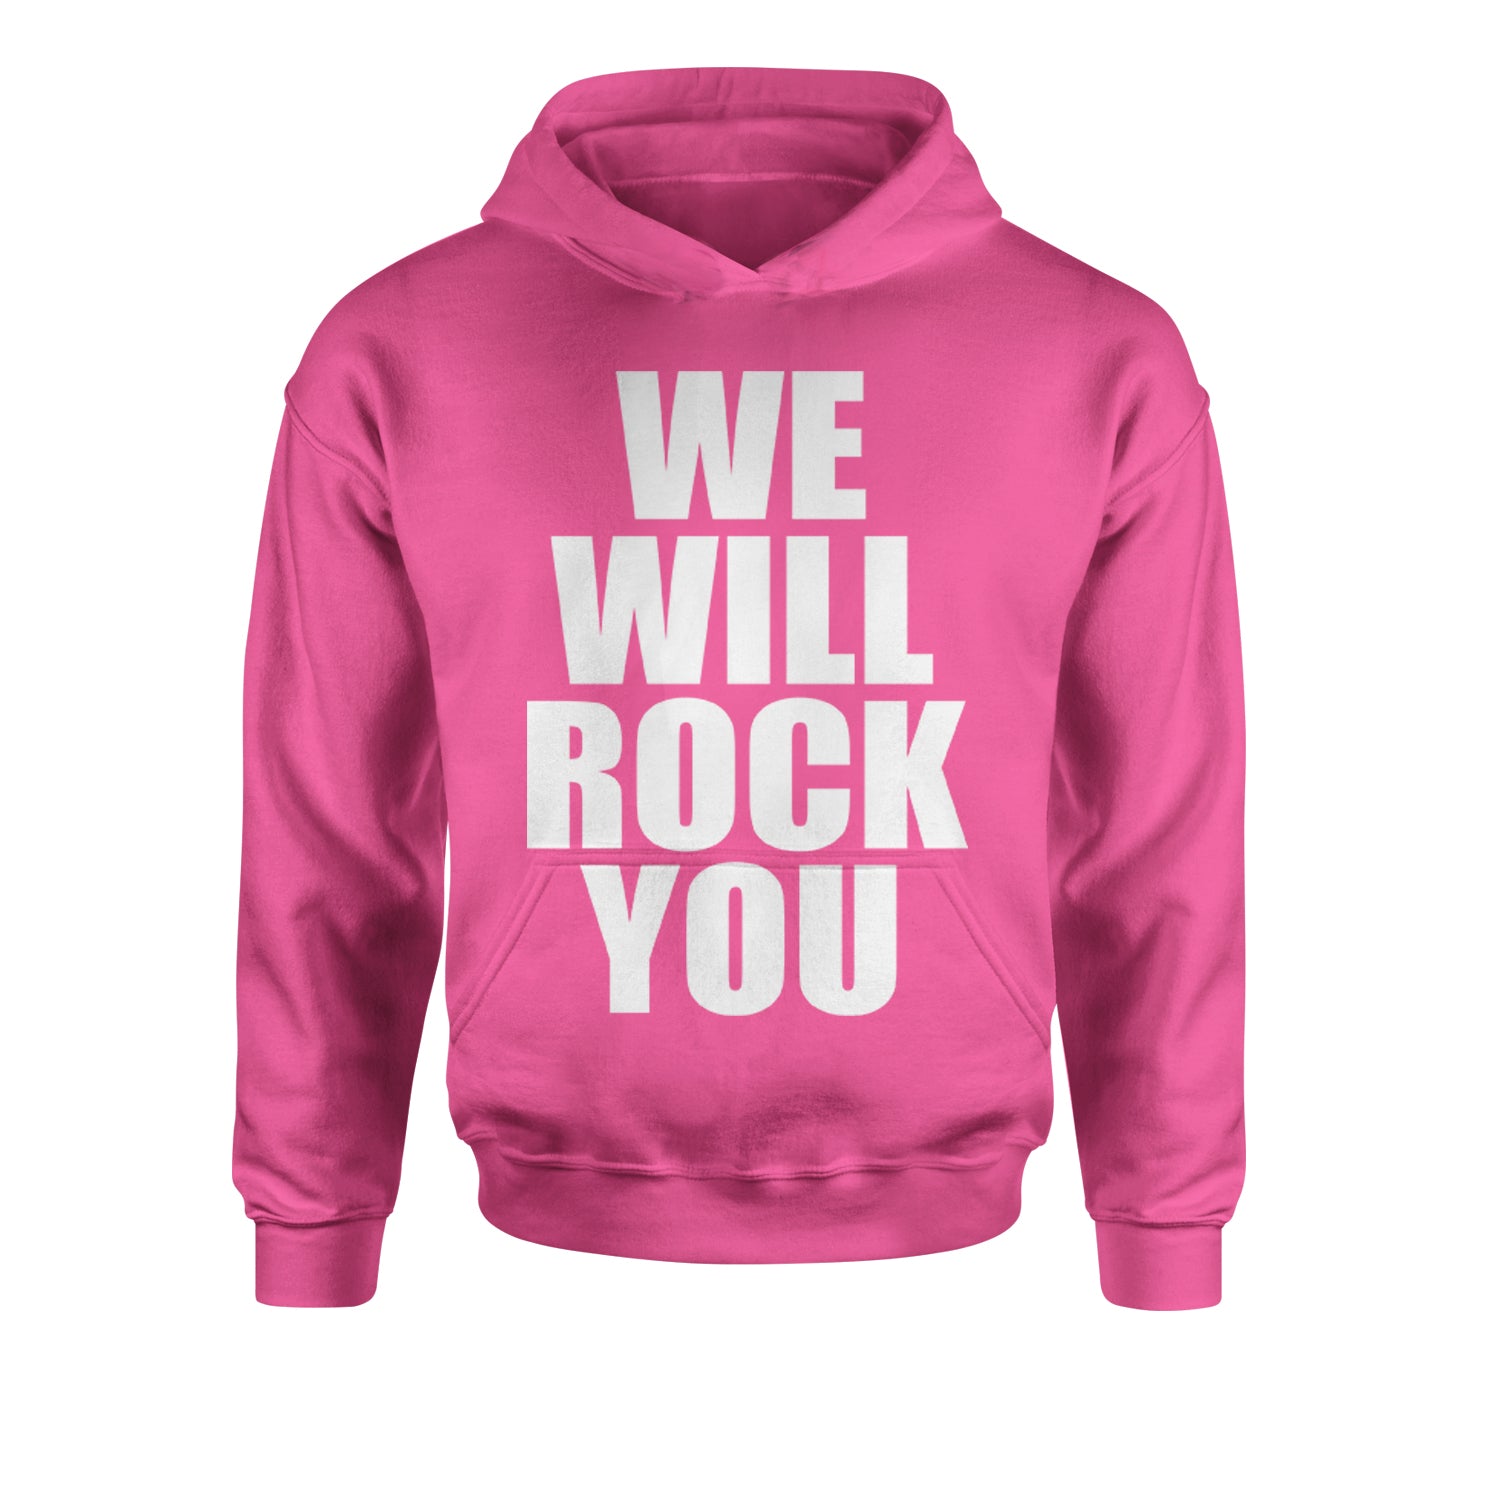 We Will Rock You Youth-Sized Hoodie #expressiontees by Expression Tees